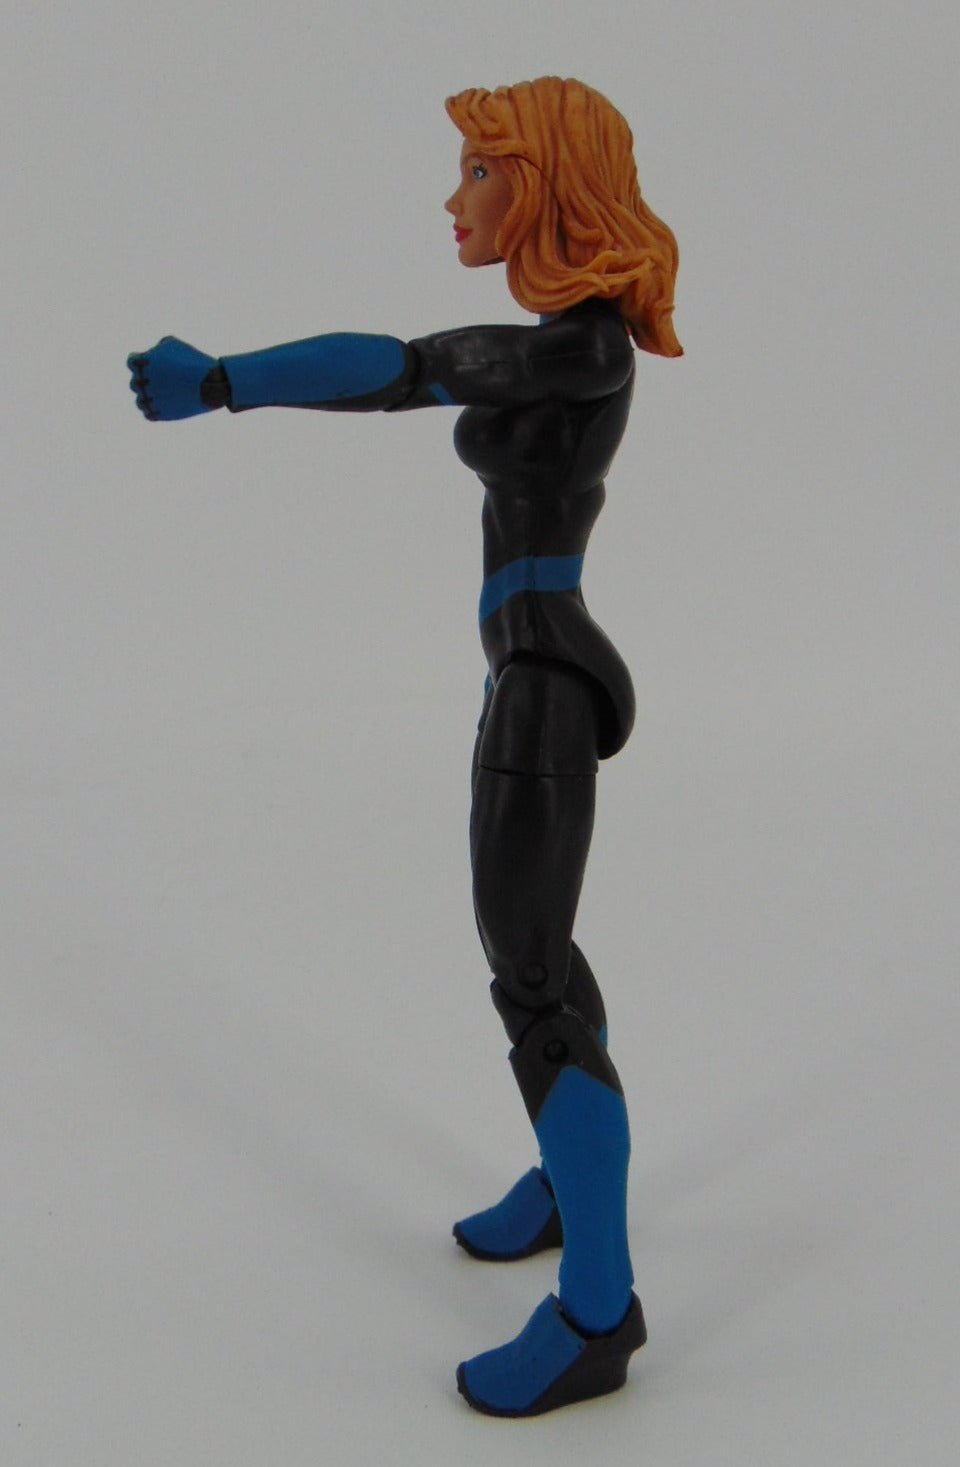 Invisible Woman - Marvel Legends (Complete)